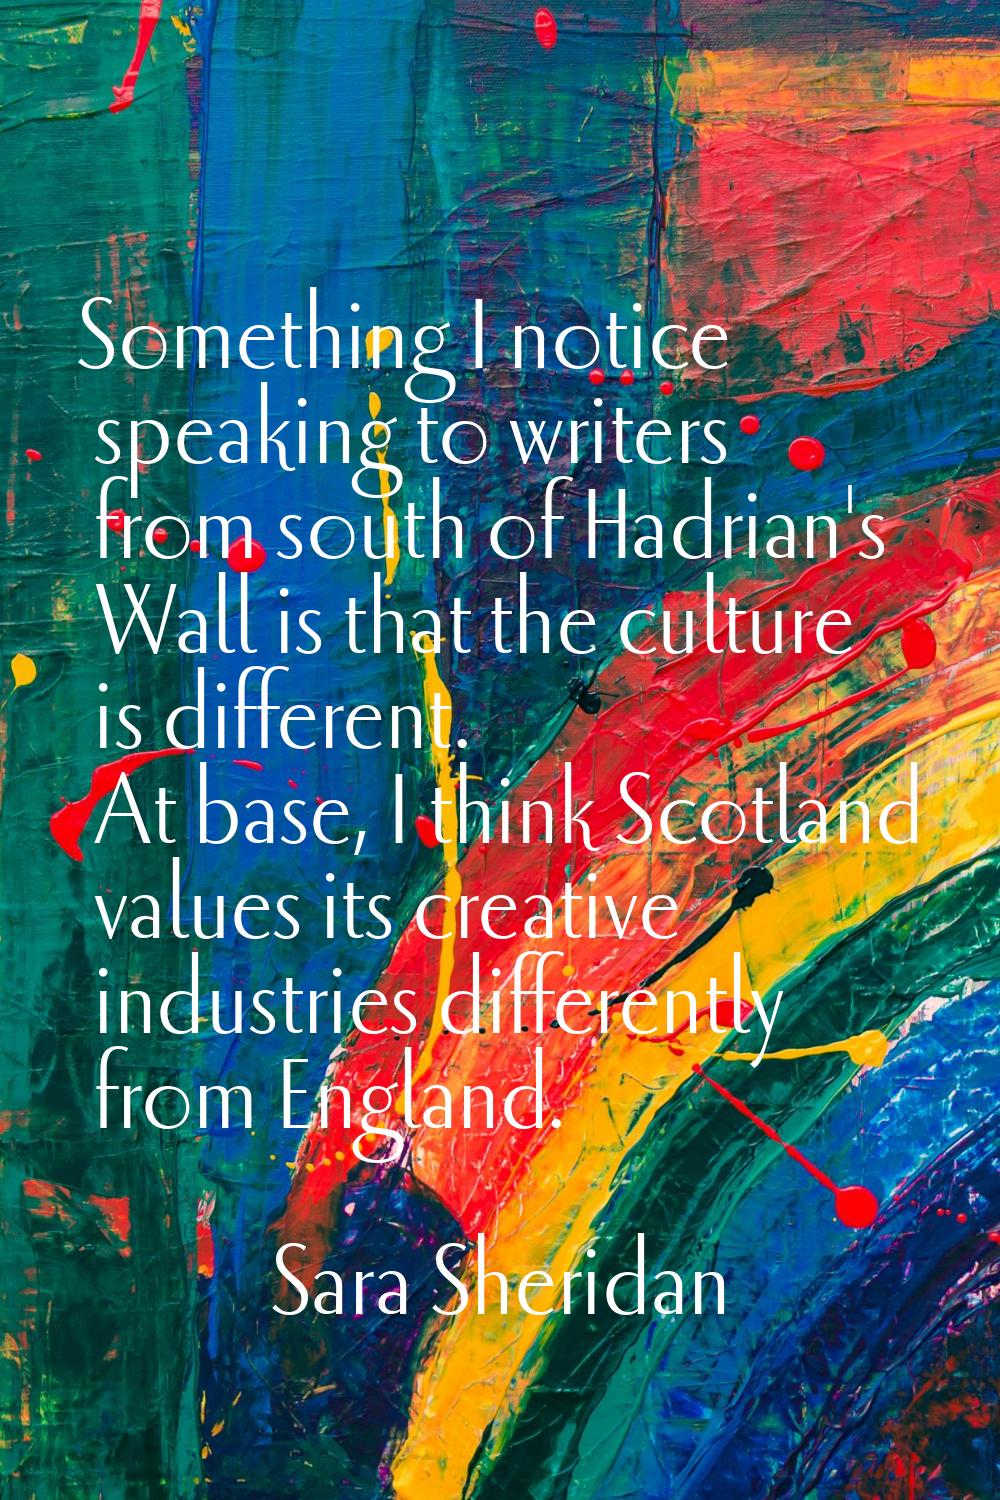 Something I notice speaking to writers from south of Hadrian's Wall is that the culture is differen